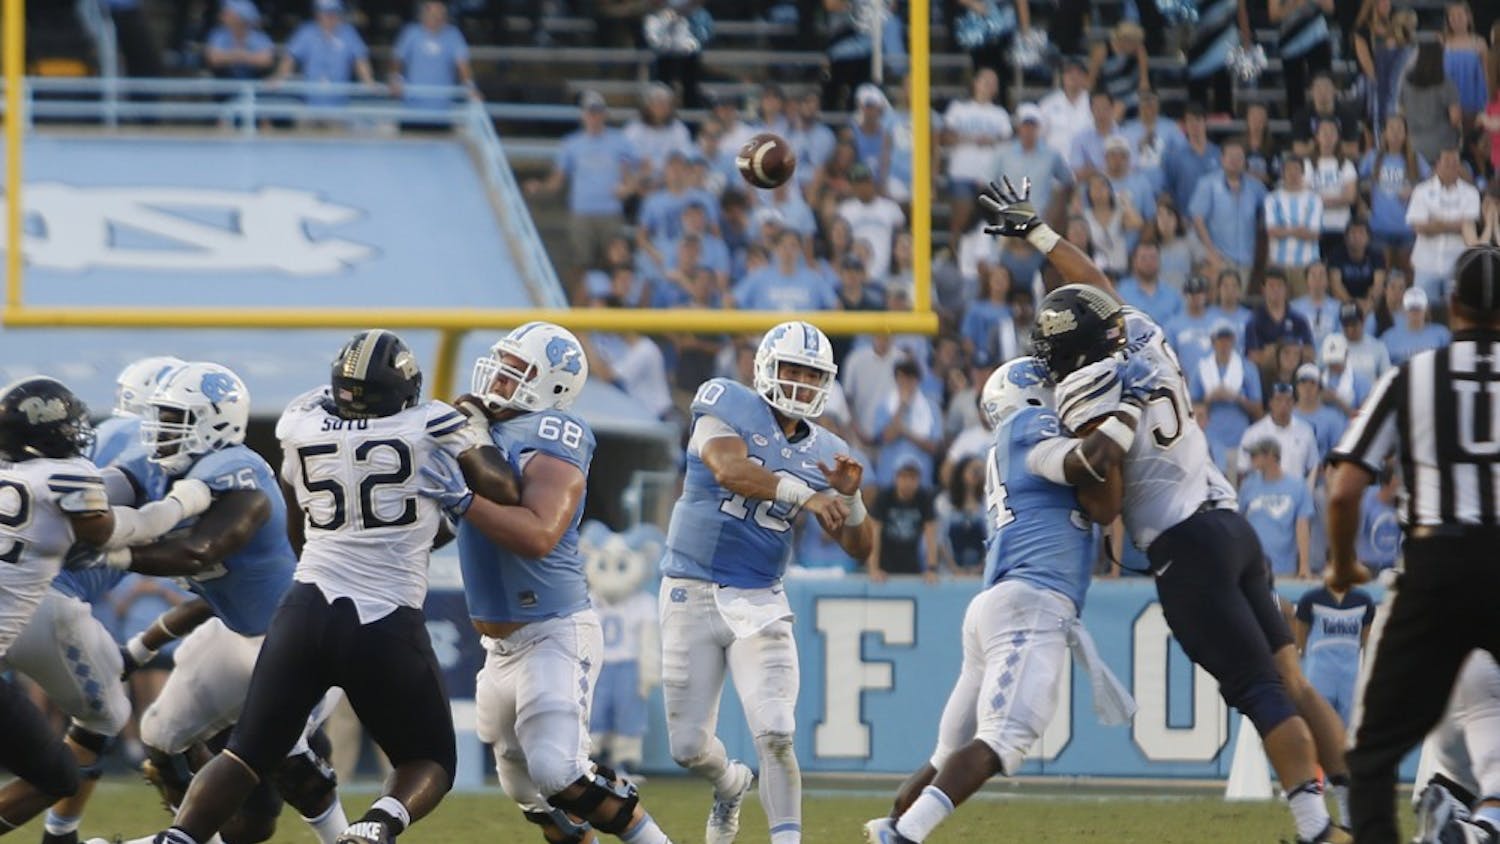 UNC quarterback Mitch Trubisky throws a pass against Pittsburgh on September 24th.